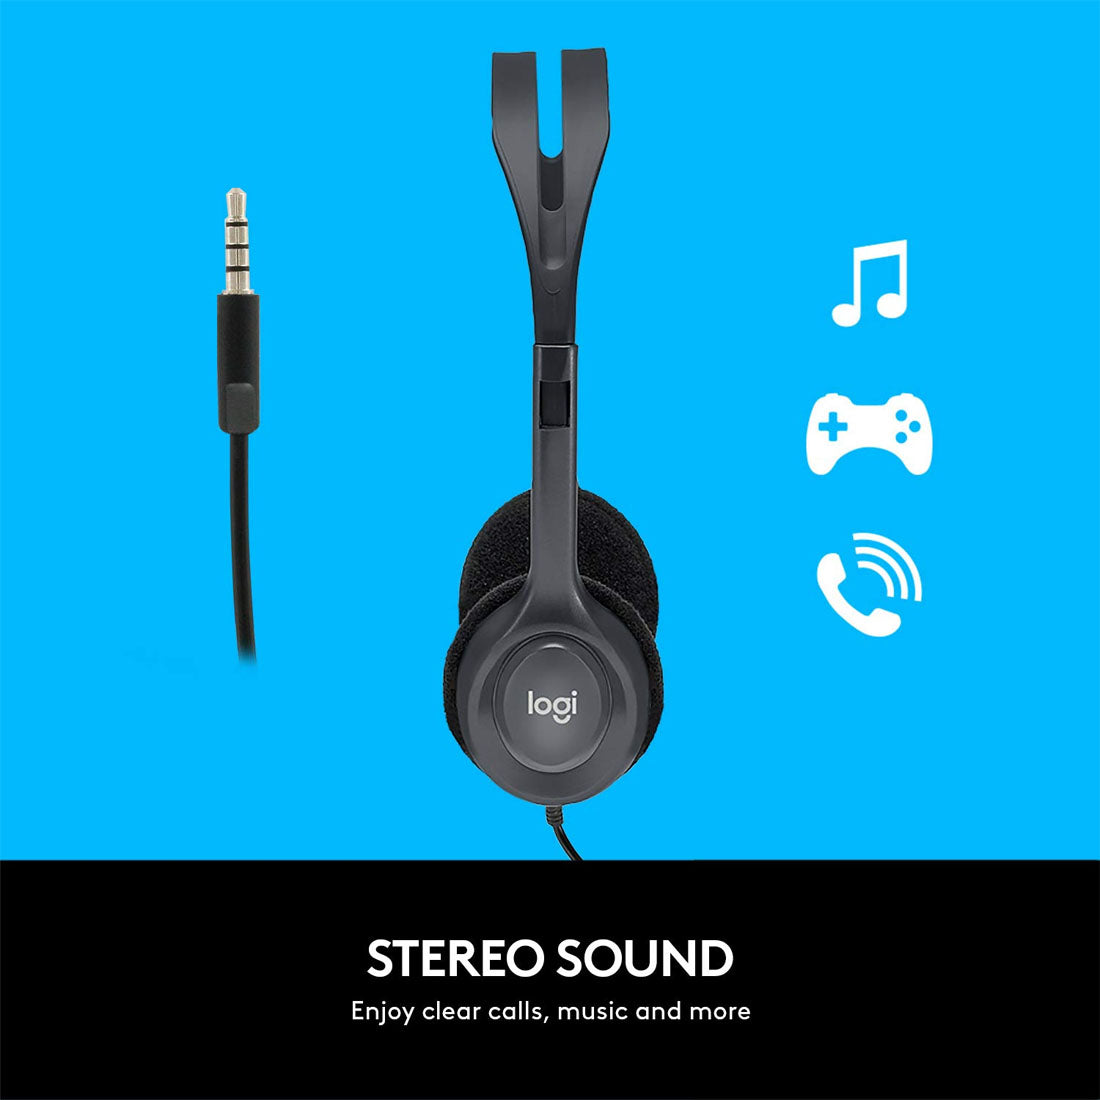 Logitech H111 Wired Stereo 3.5mm Headset with 180° Rotating Microphone